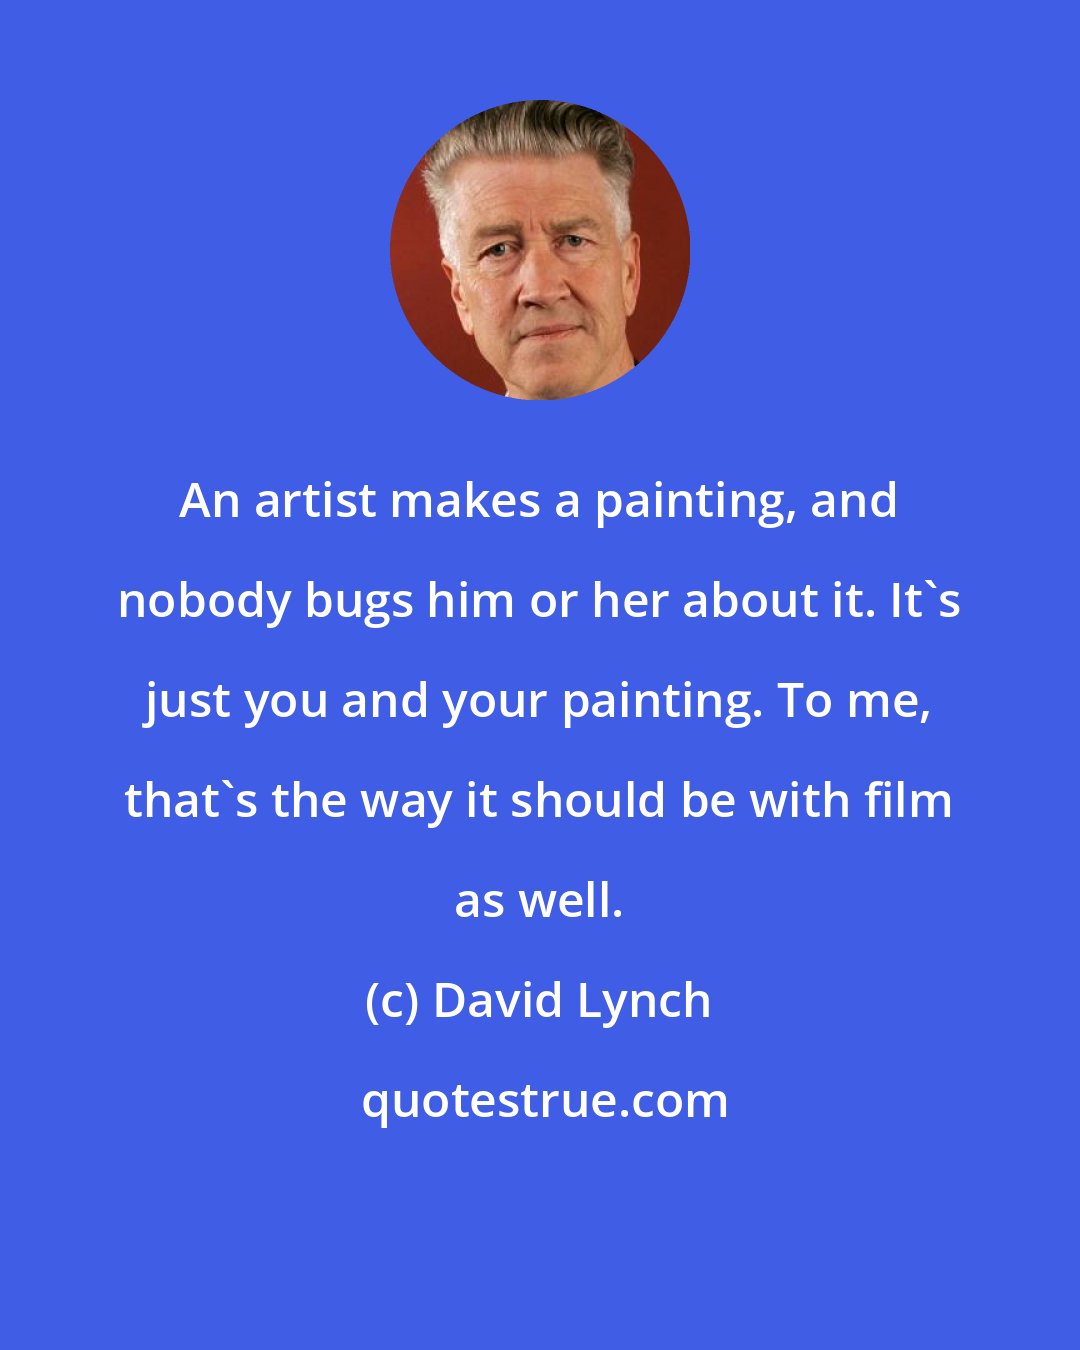 David Lynch: An artist makes a painting, and nobody bugs him or her about it. It's just you and your painting. To me, that's the way it should be with film as well.